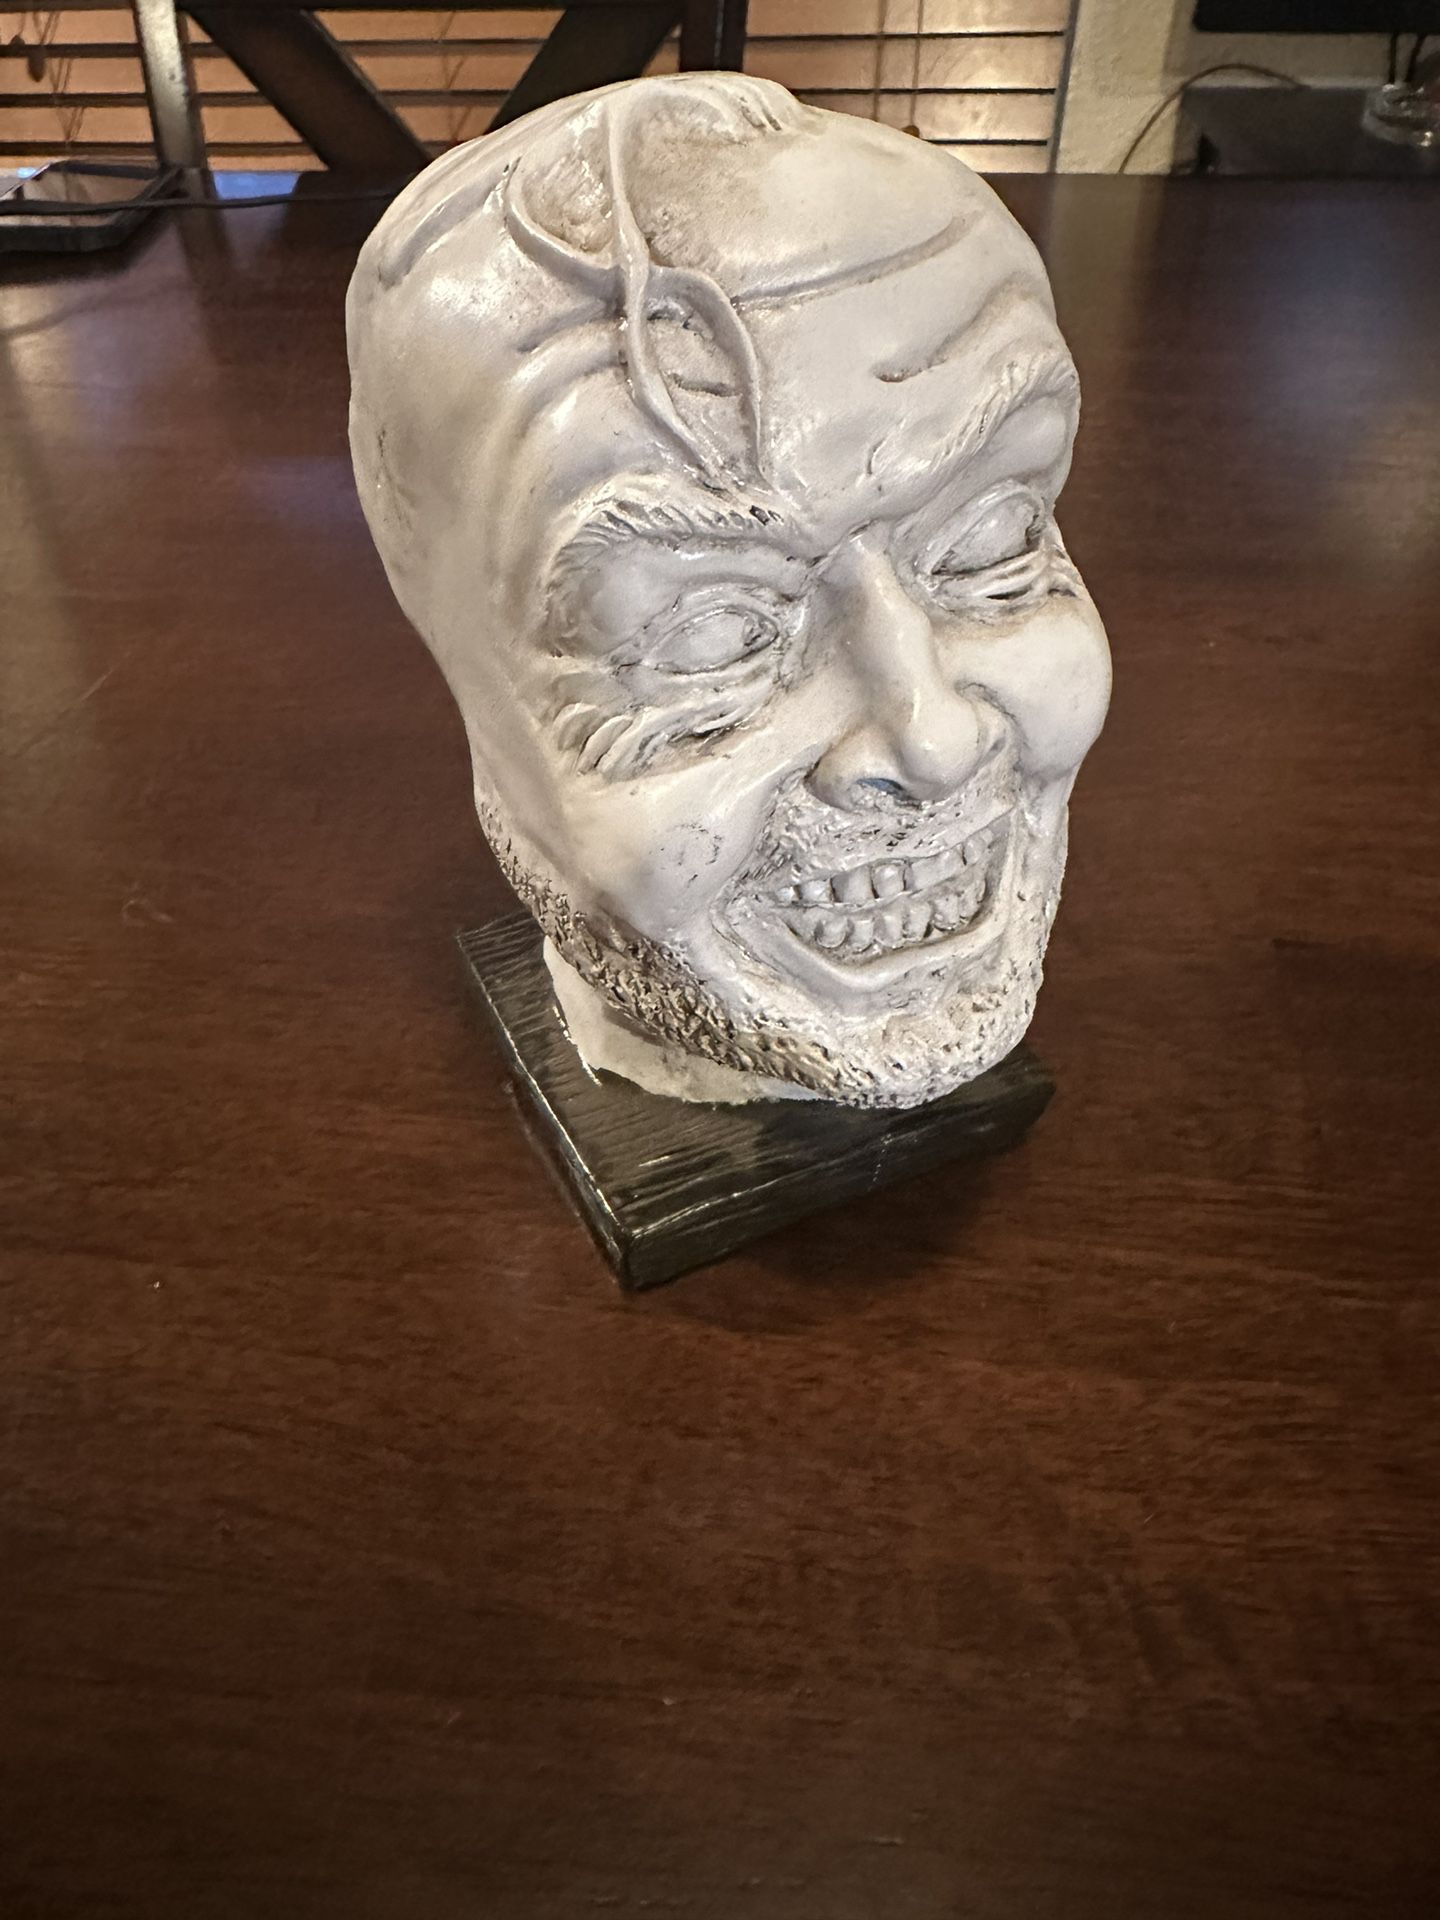 Head Bust Cast Of Jack Nicholson’s Character In Movie The Shining Here’s Johnny Face